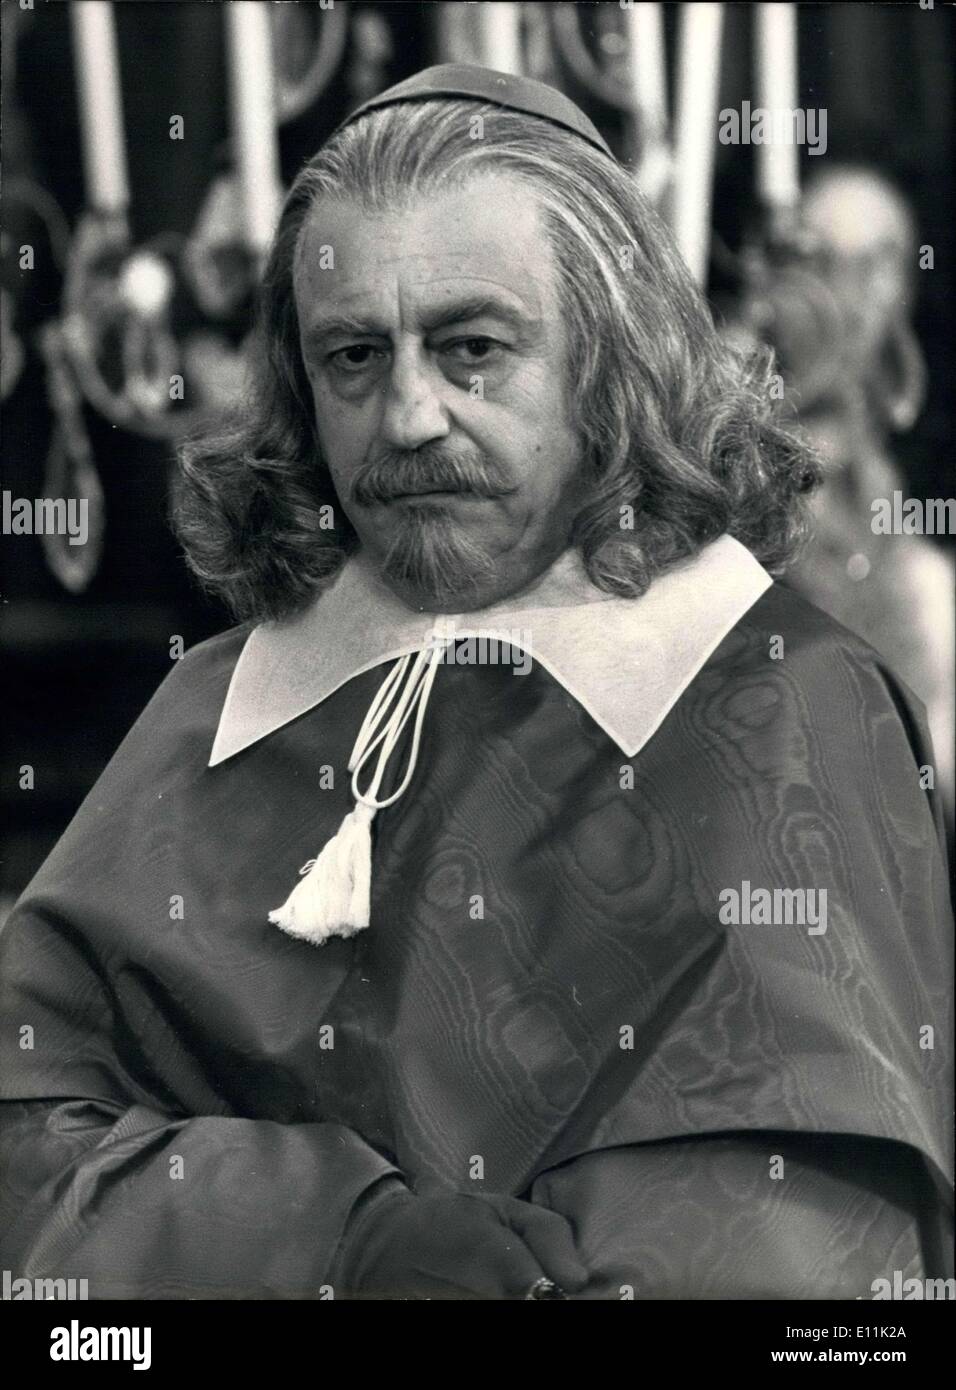 May 24, 1978 - He has been so busy with movies and plays lately that Francois Perier's appearance on TV is an event. He will soon be playing his first historical role, that of Cardinal Mazarin, the famous French statesman from Italy. Pierre Cardinal is directing this new series that will be shown over four episodes for the third television chain. Francois Perier is pictured in the role of Cardinal Mazarin. Stock Photo